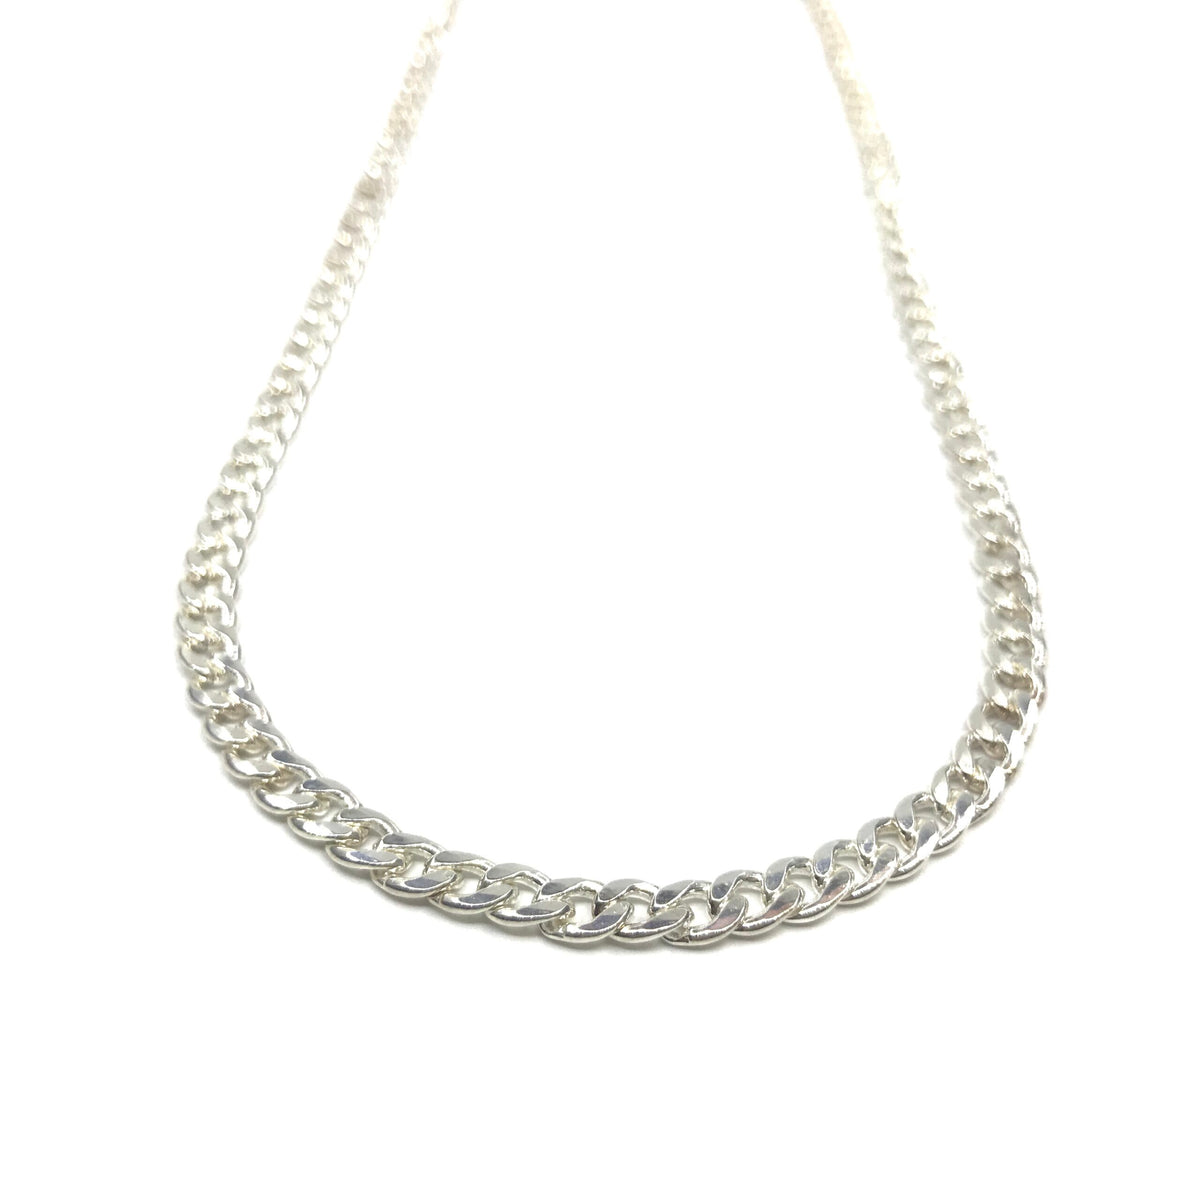 Silver Necklace - Flat Oval Chain